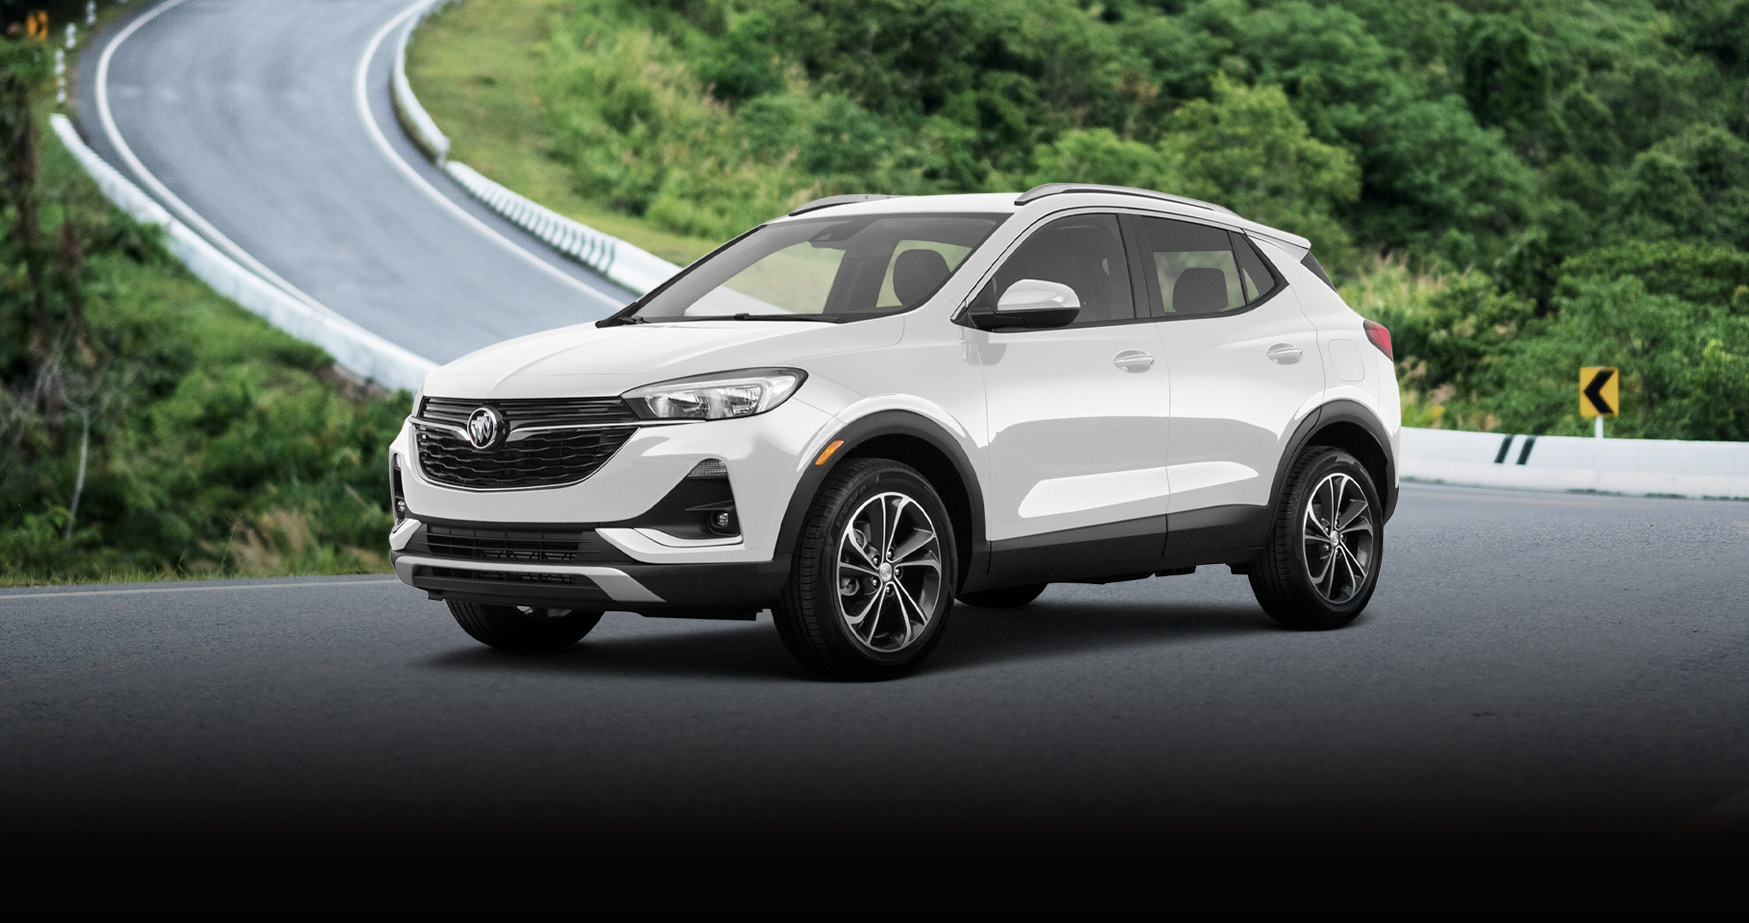  We can put you behind the wheel of the best new compact SUV at Courtesy Buick GMC. Test drive the 2022 Buick Encore at your car dealer in Louisville, KY, today